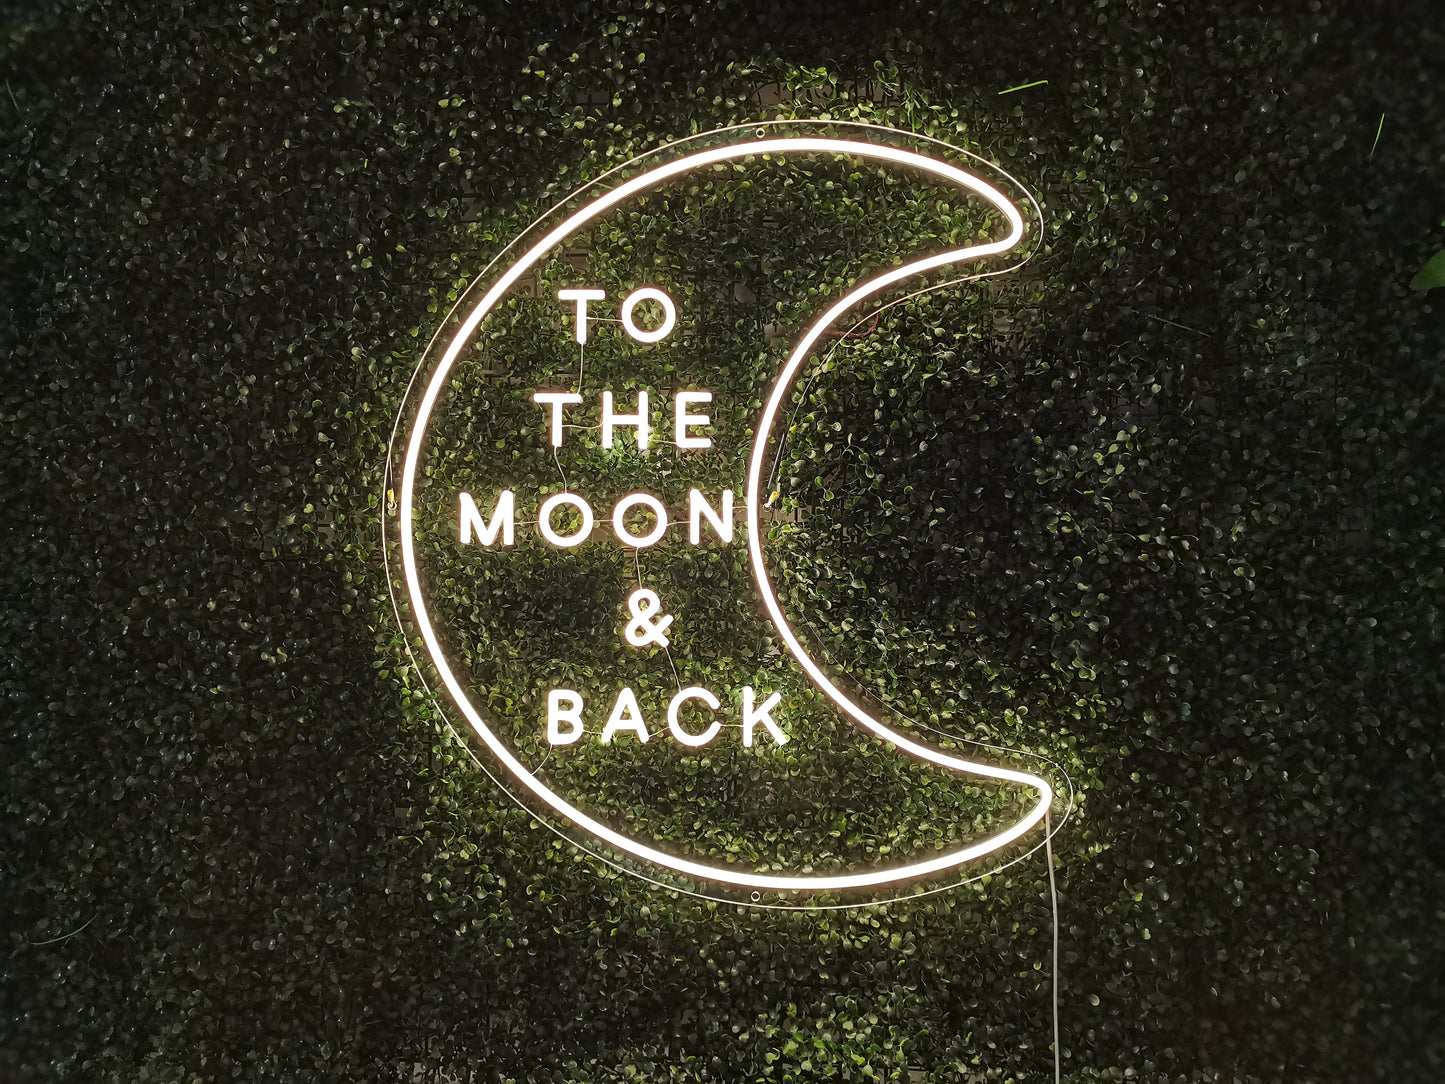 To the moon & Back ネオンサイン